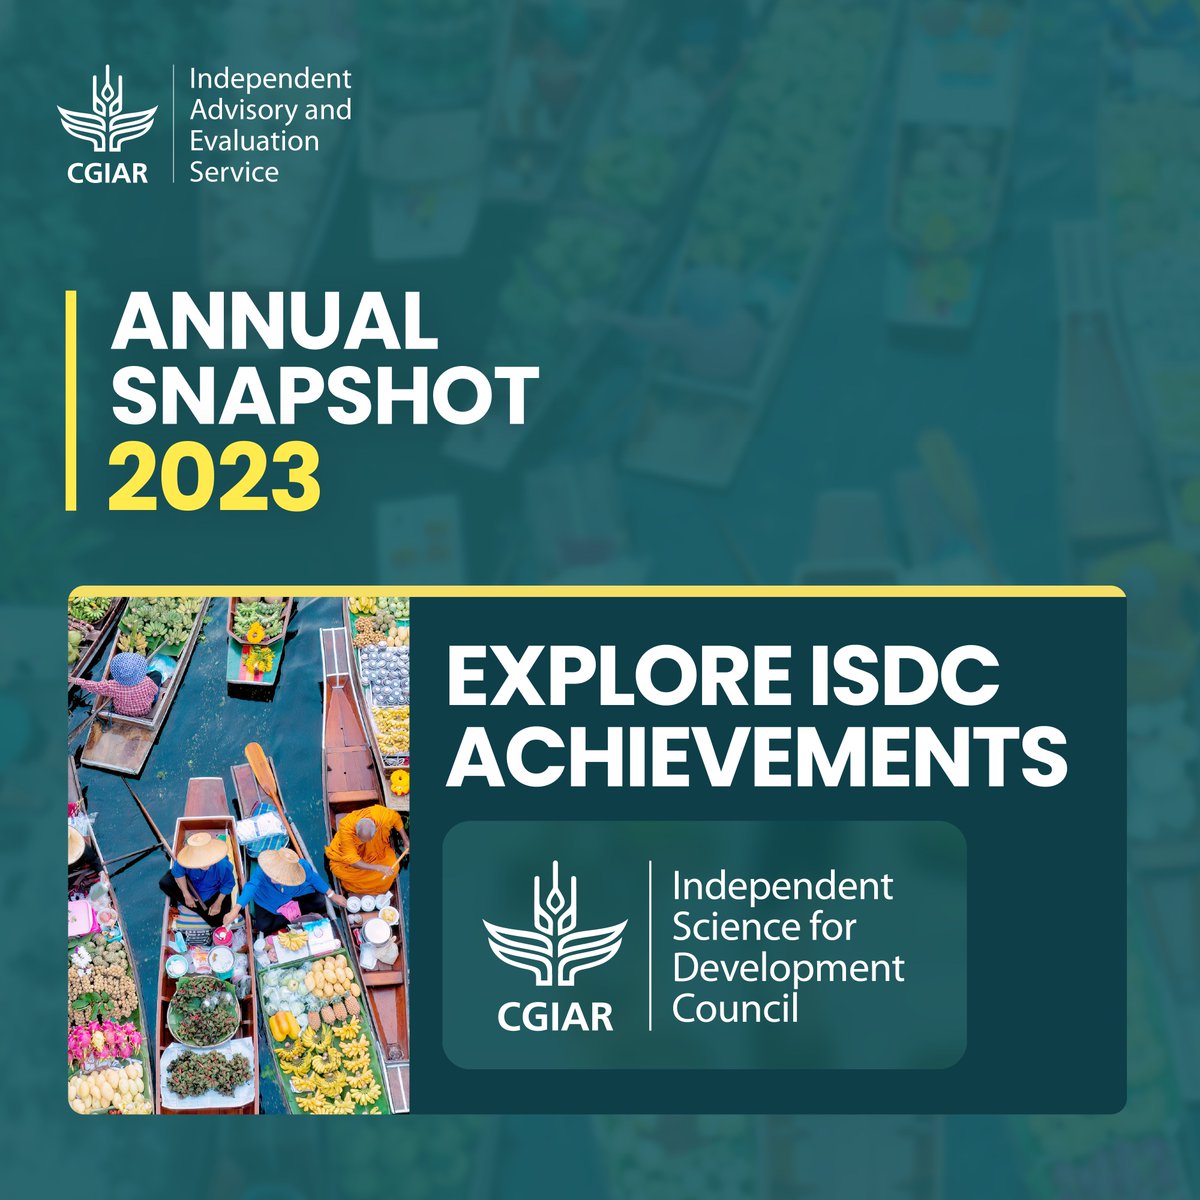 🌟 In 2023, ISDC experienced a dynamic year in which we positioned ourselves to contribute significantly to @CGIAR’s portfolio evolution in 2024 and delivered key commissioned research on megatrends. Explore more in the @IAES_CGIAR 2023 Annual Snapshot: bit.ly/4bK83Km